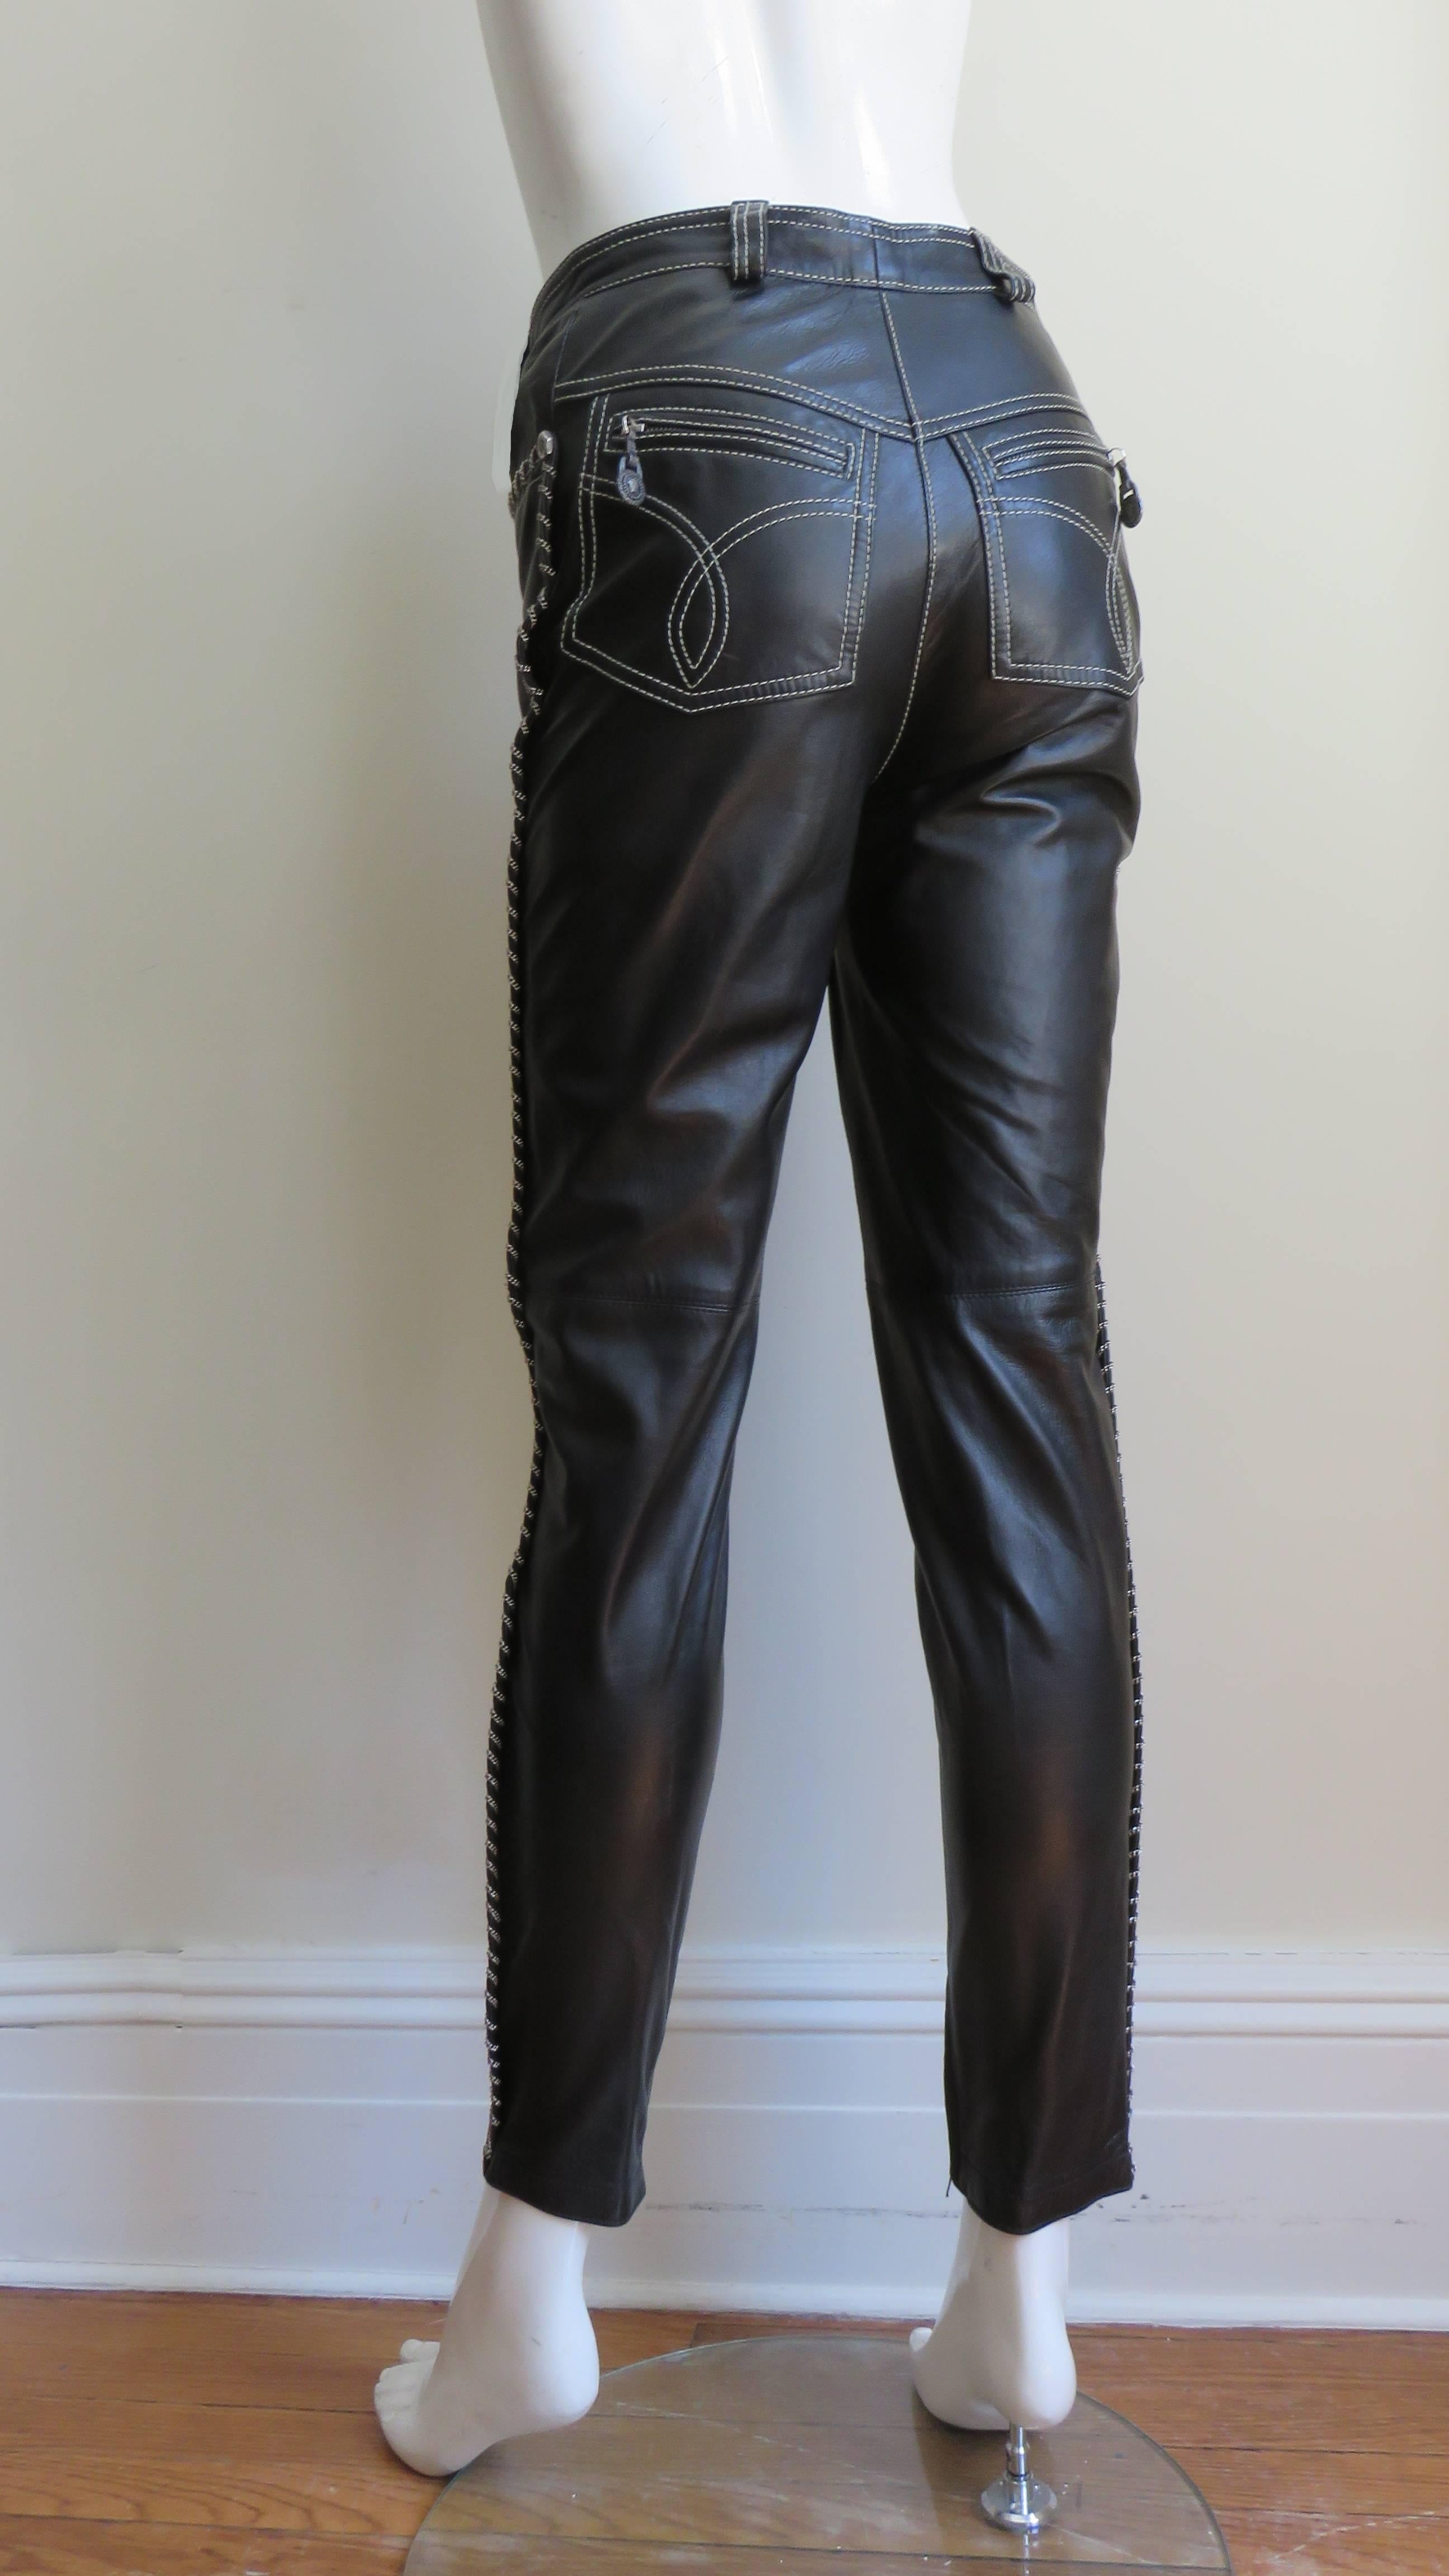  Gianni Versace A/W 1992 Leather Motorcycle Jacket and Pants With Chain Trim  For Sale 8